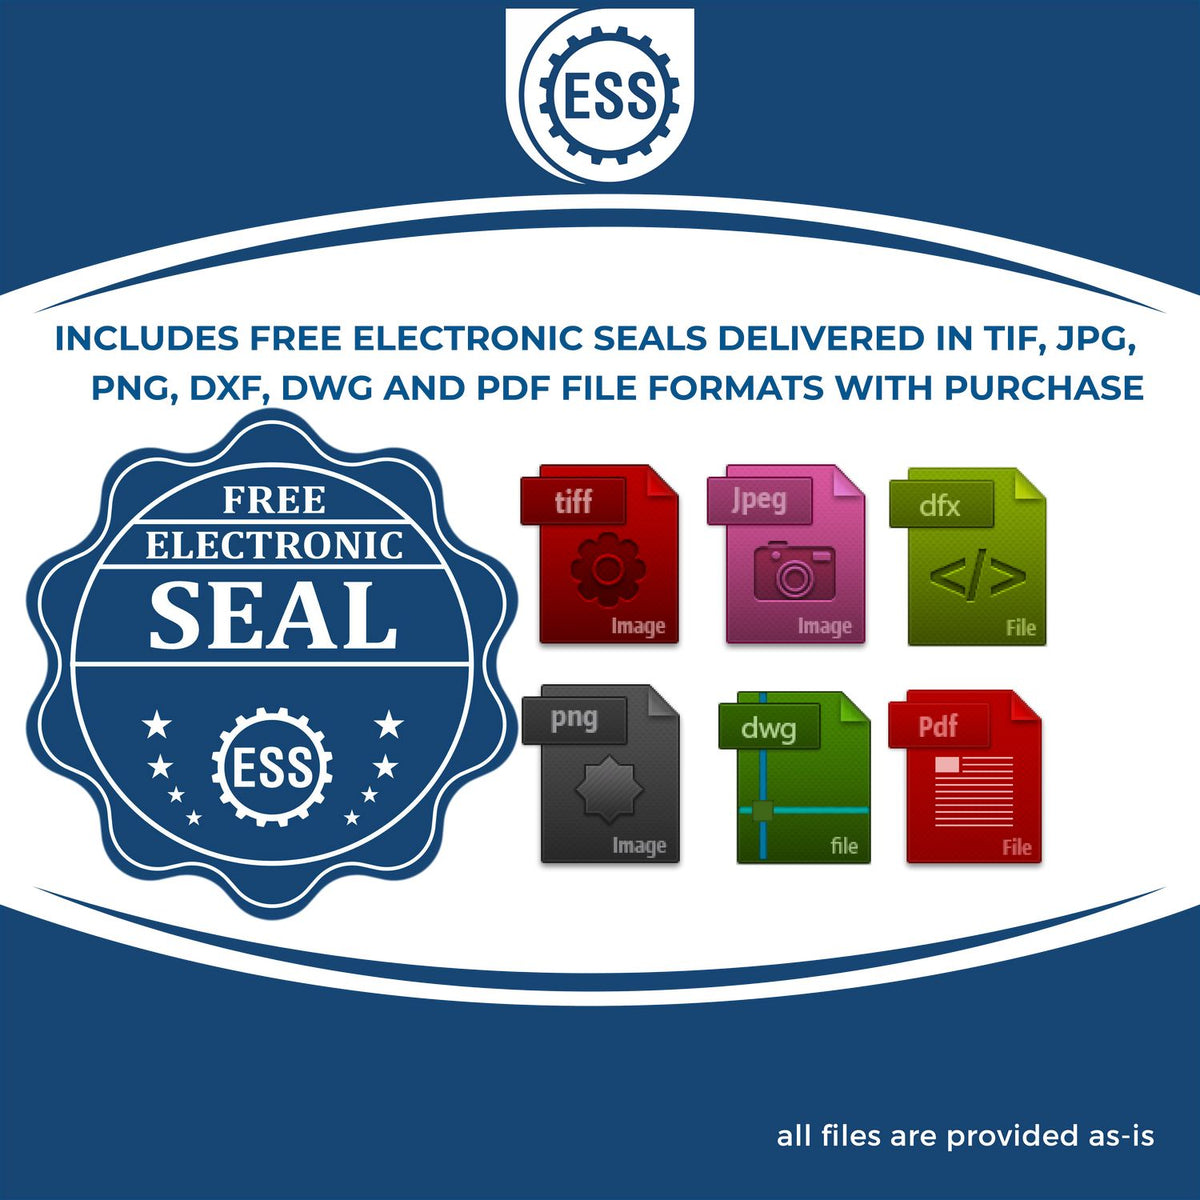 An infographic for the free electronic seal for the Hybrid Texas Landscape Architect Seal illustrating the different file type icons such as DXF, DWG, TIF, JPG and PNG.